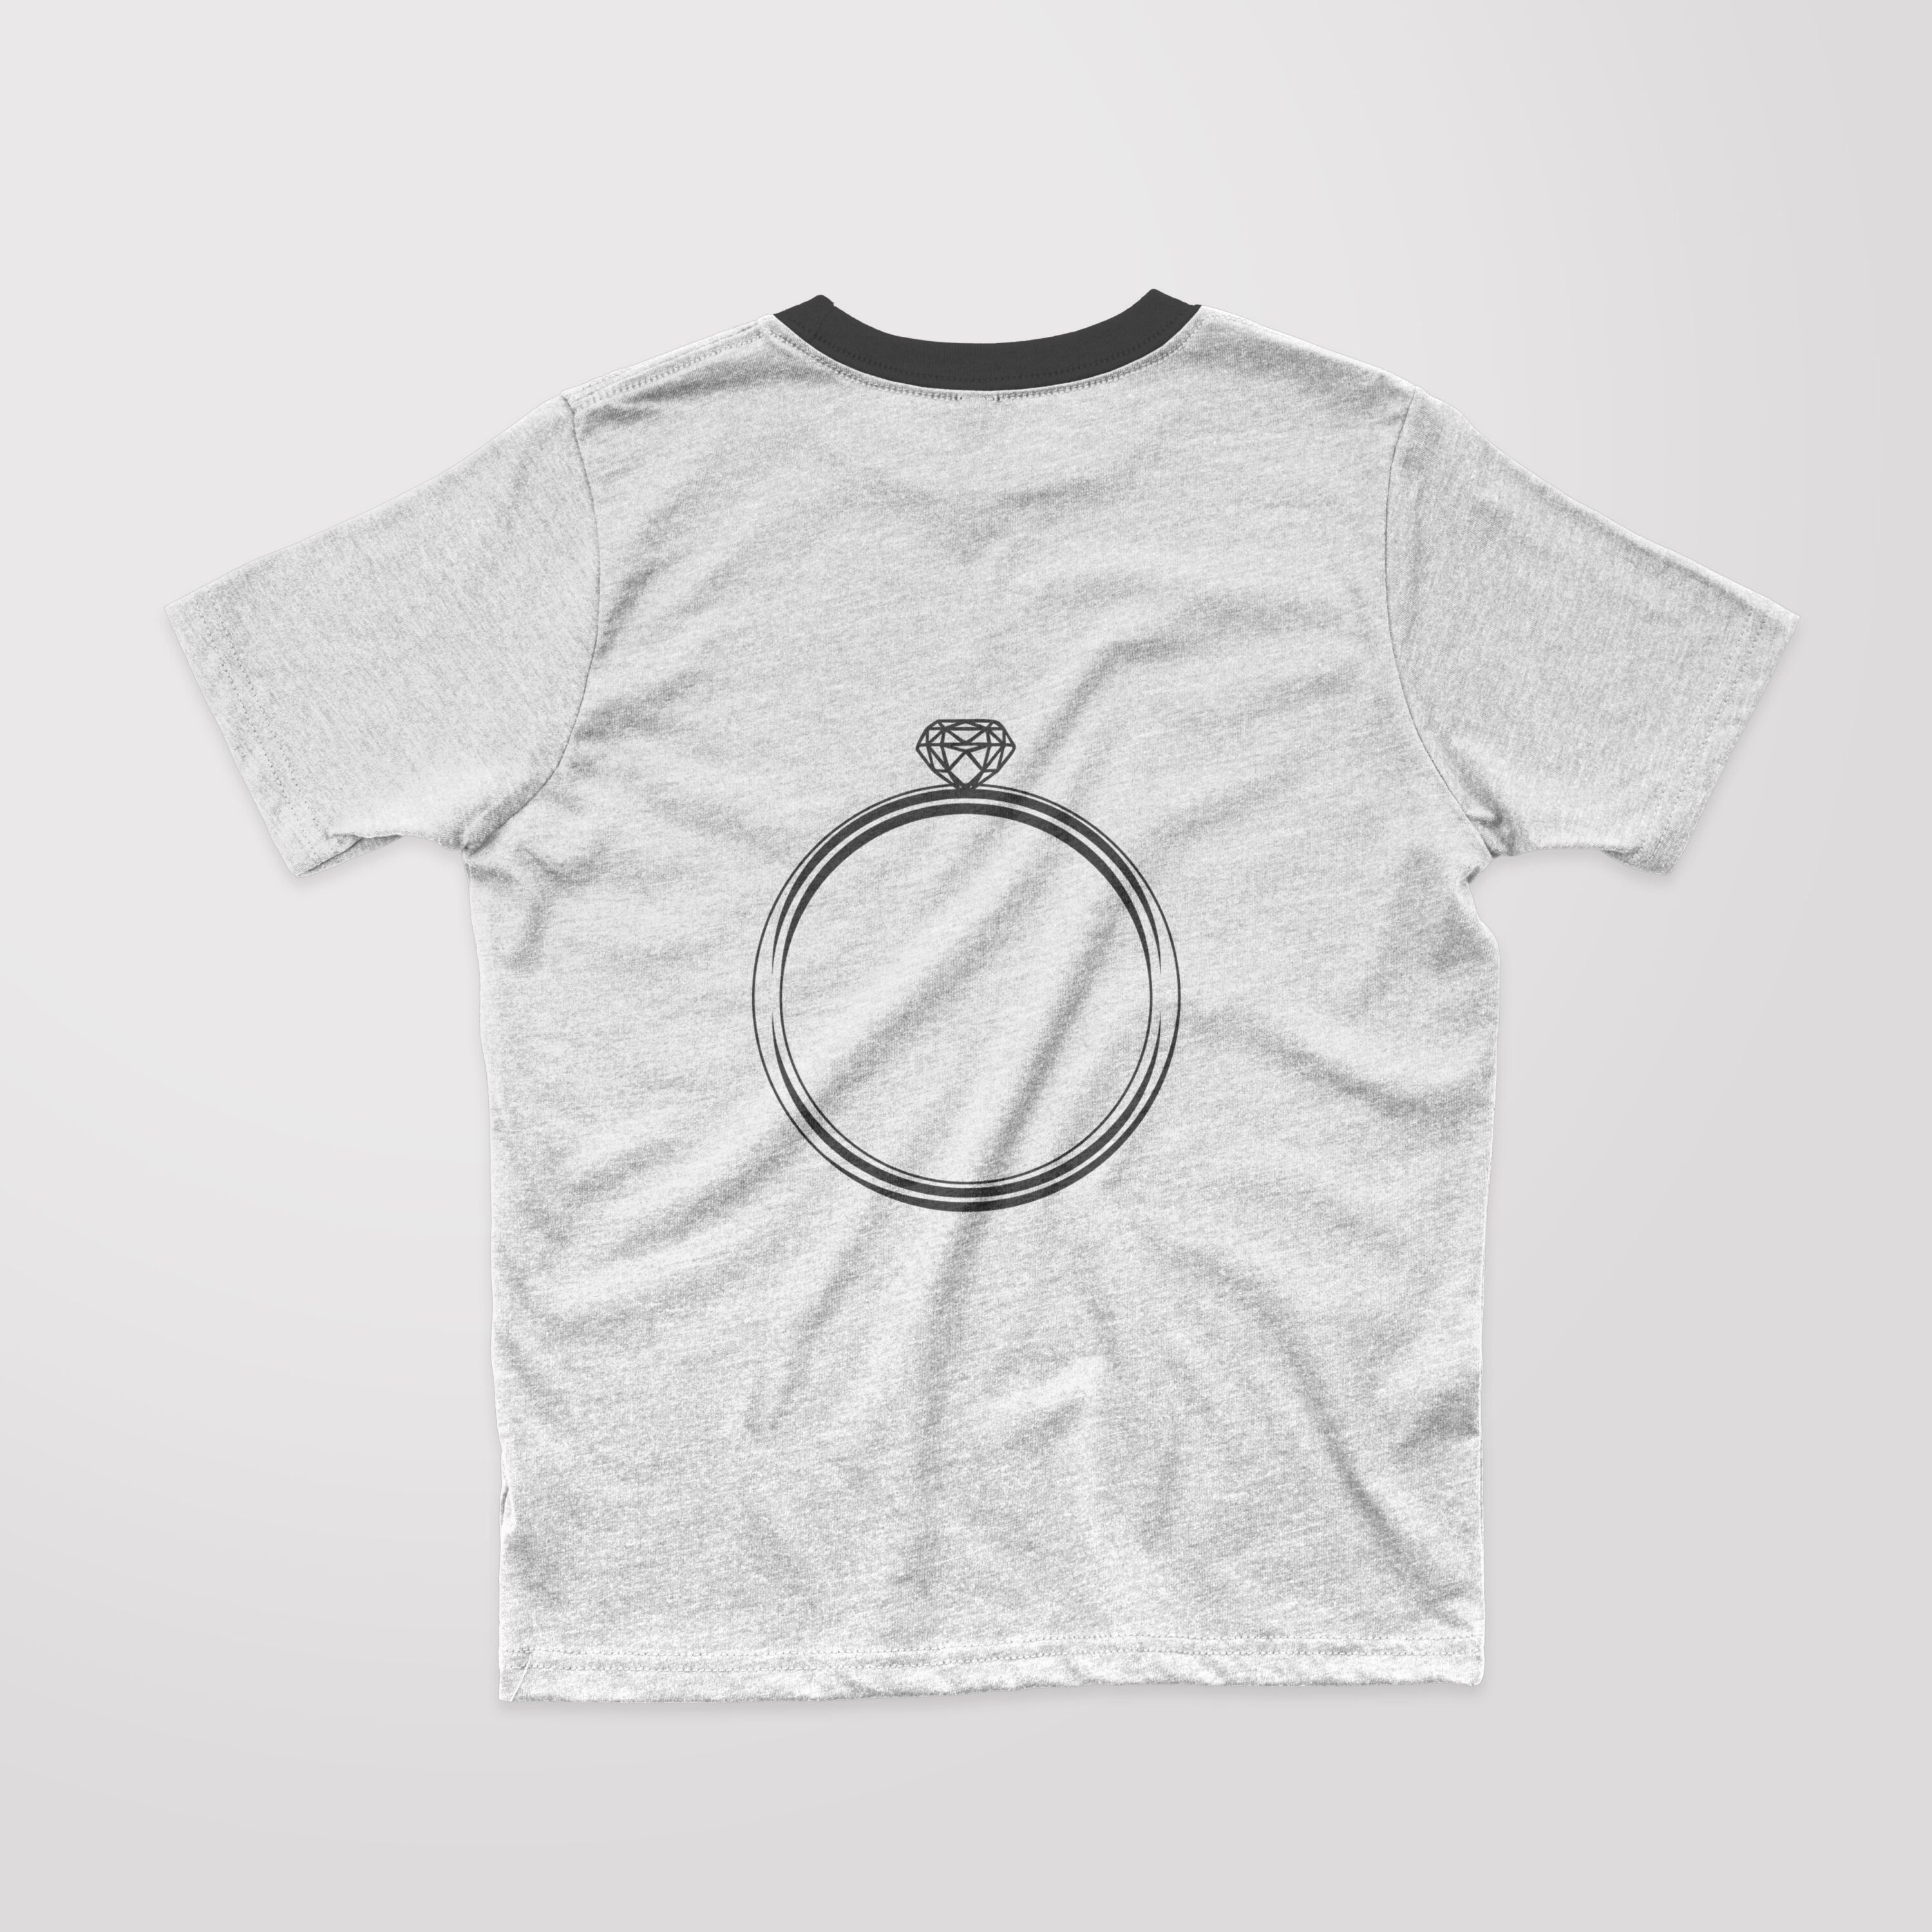 Image of a t-shirt with a fabulous print of a outline diamond ring.